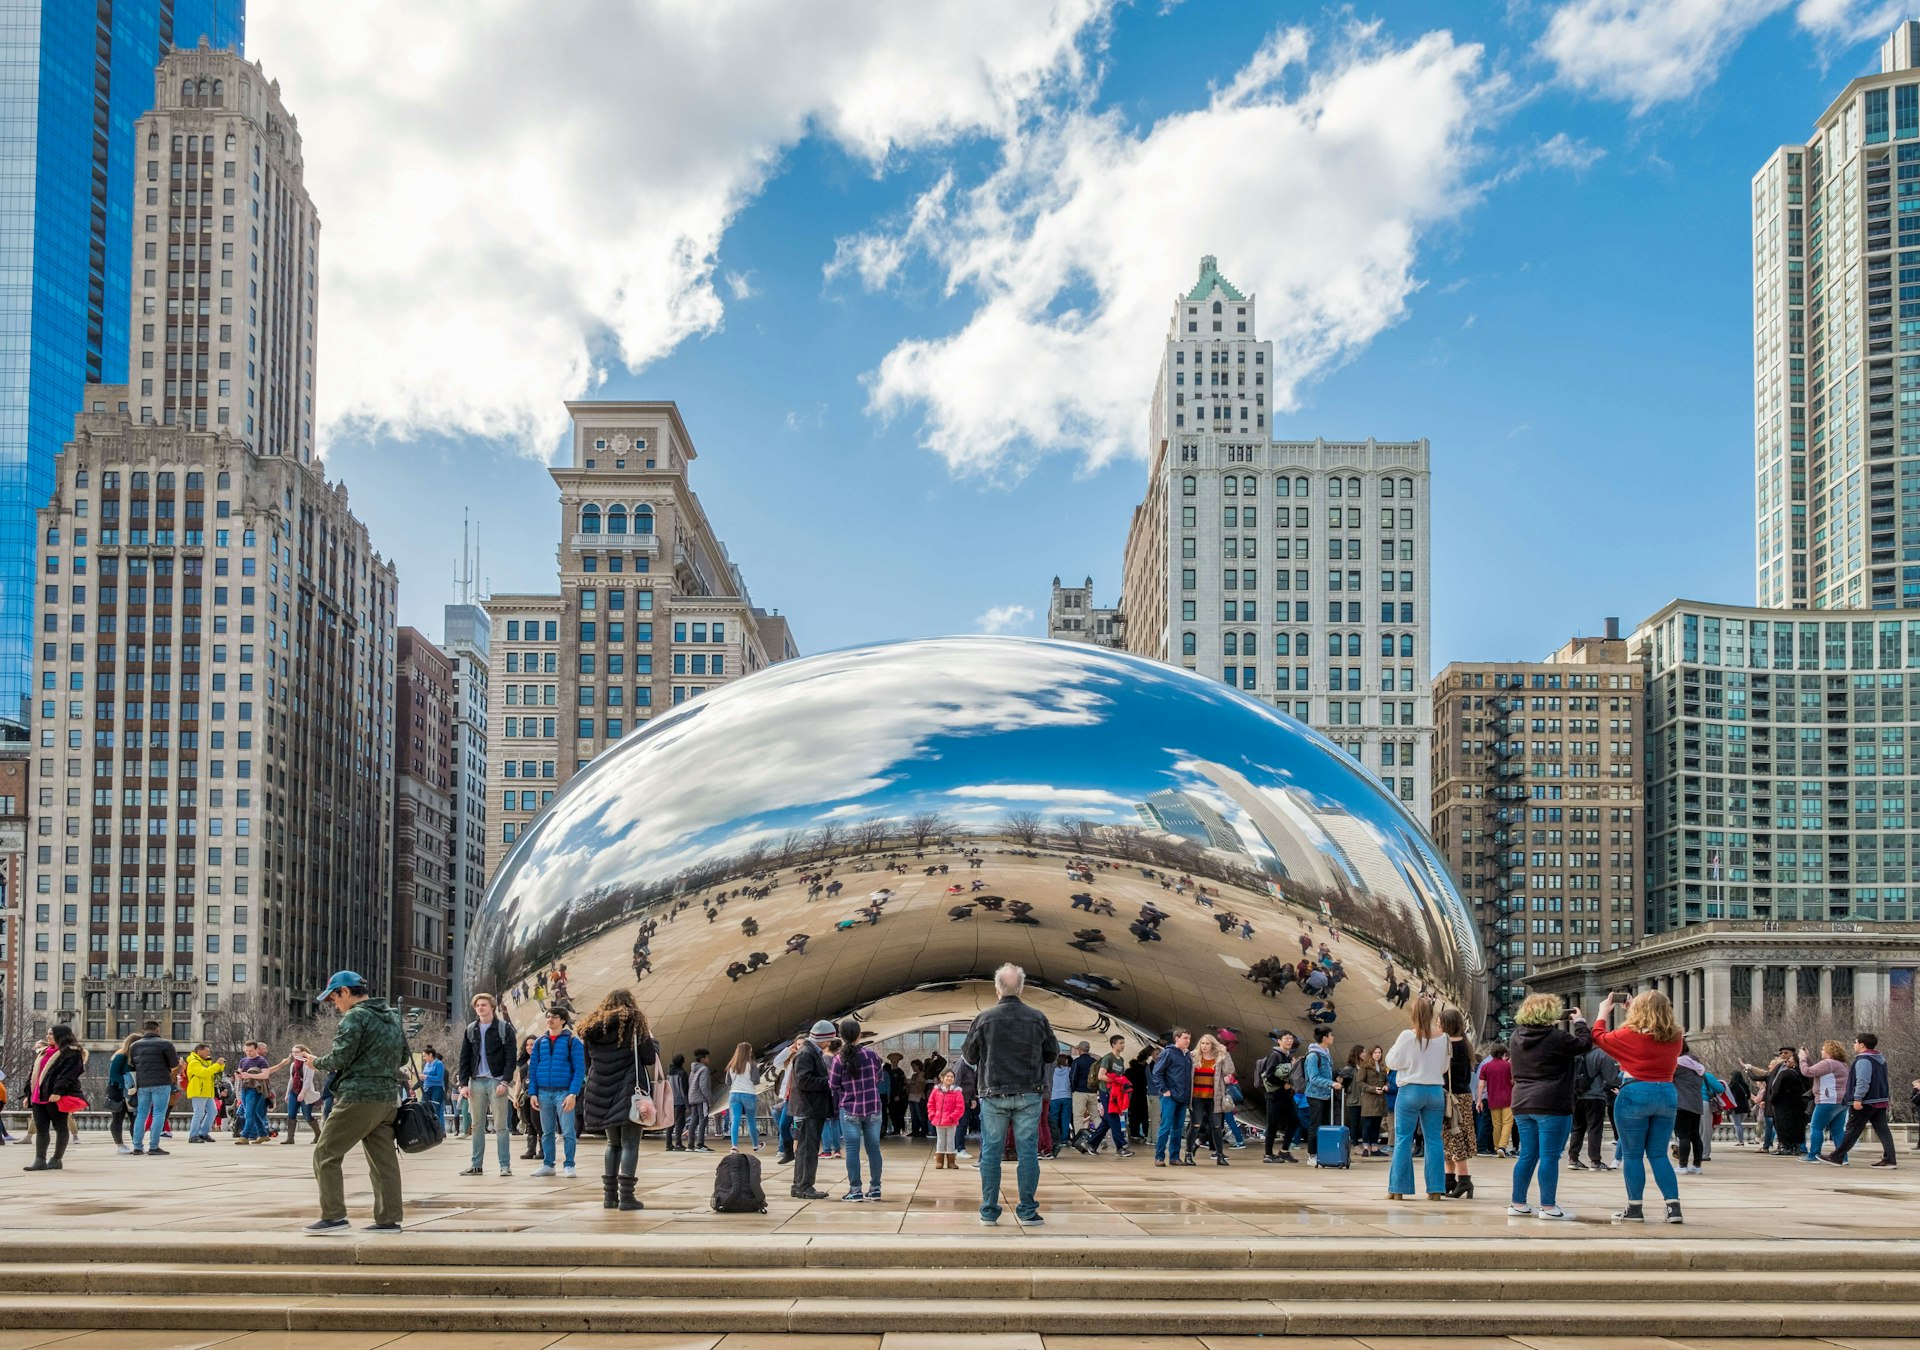 Tourists admire iconic Cloud Gate at Millenium Park during early spring Rolf_52_Shutterstock.jpg